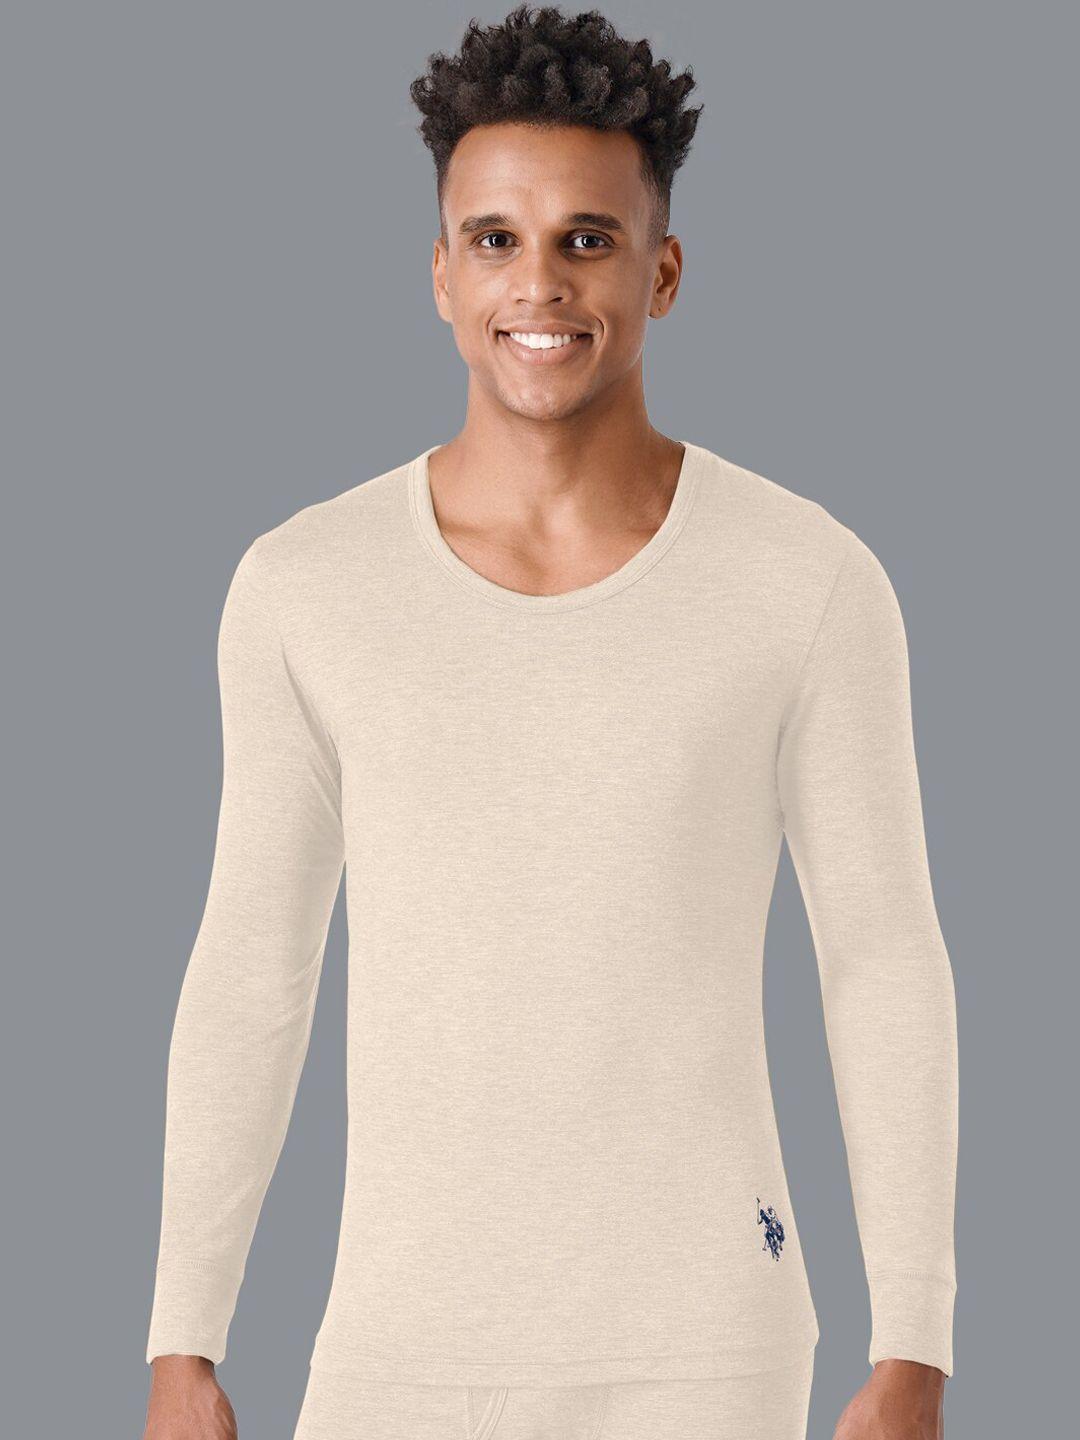 u.s. polo assn. men beige solid thermal tops